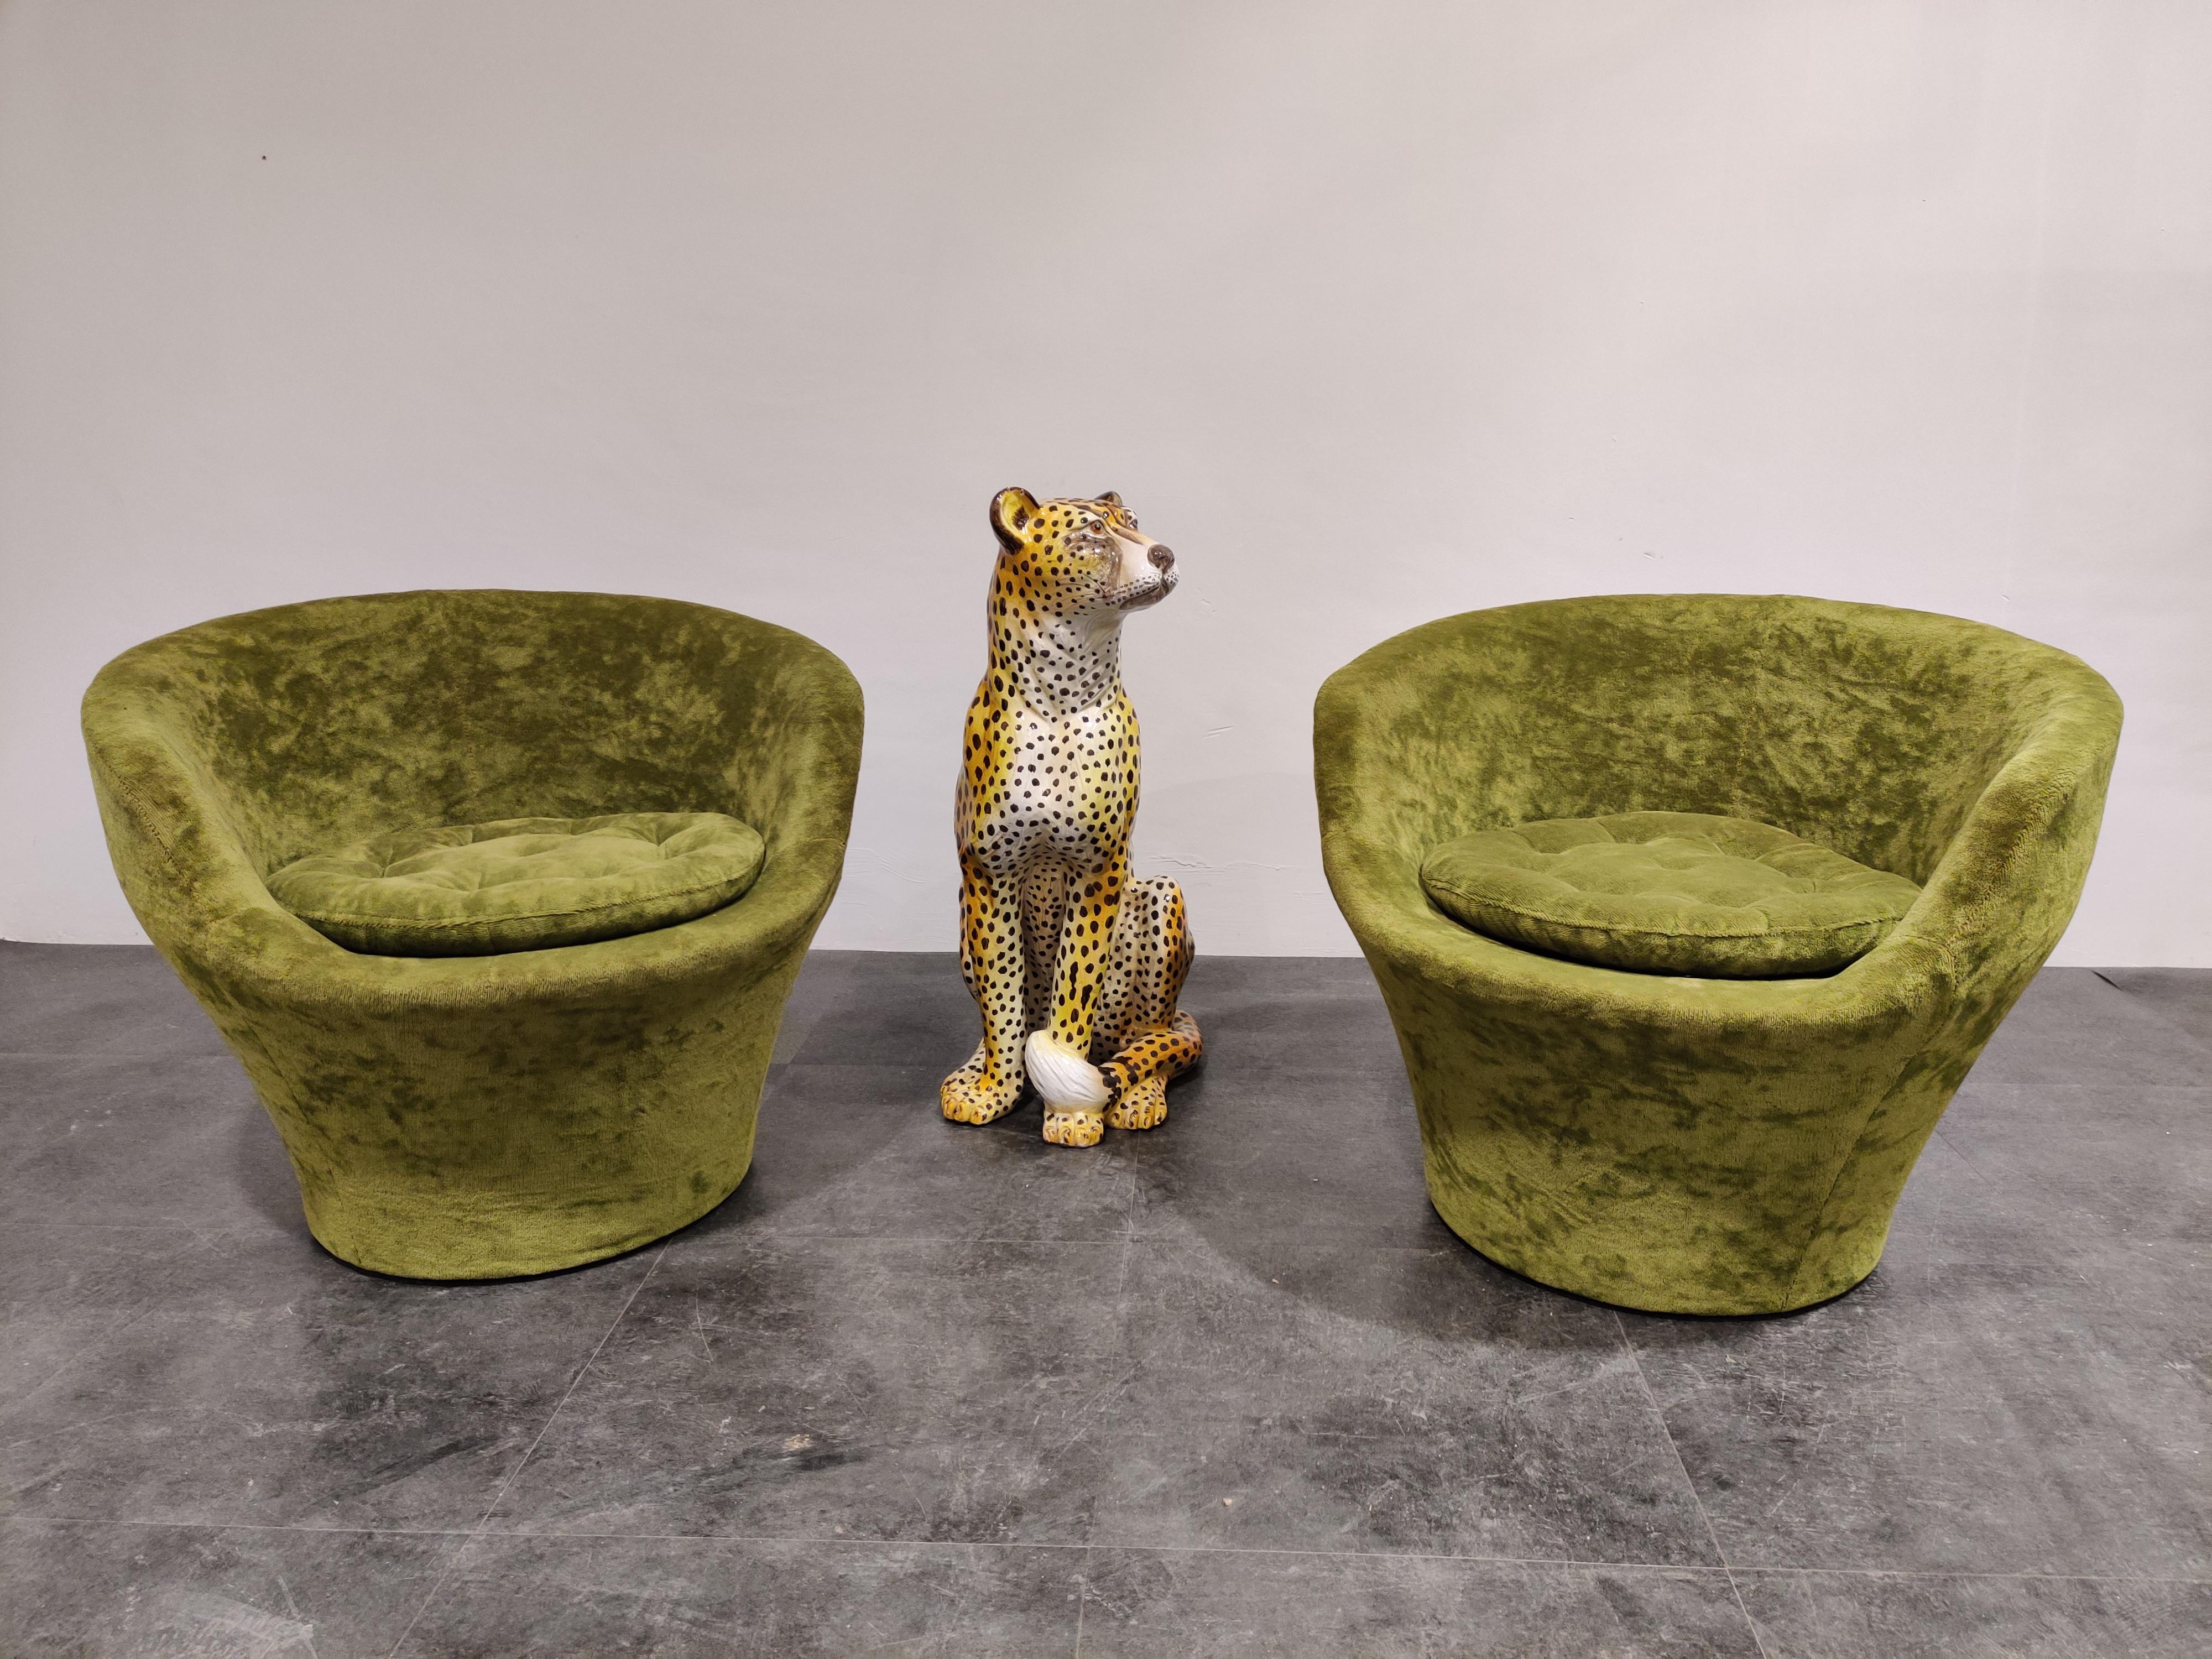 Pair of midcentury club or cocktail chairs upholstered in a green velvet fabric.

Beautiful, charming design. This timeless design and lively color mixes well with modern day interiors,

1970s, Belgium

Good condition.

Dimensions:
Height